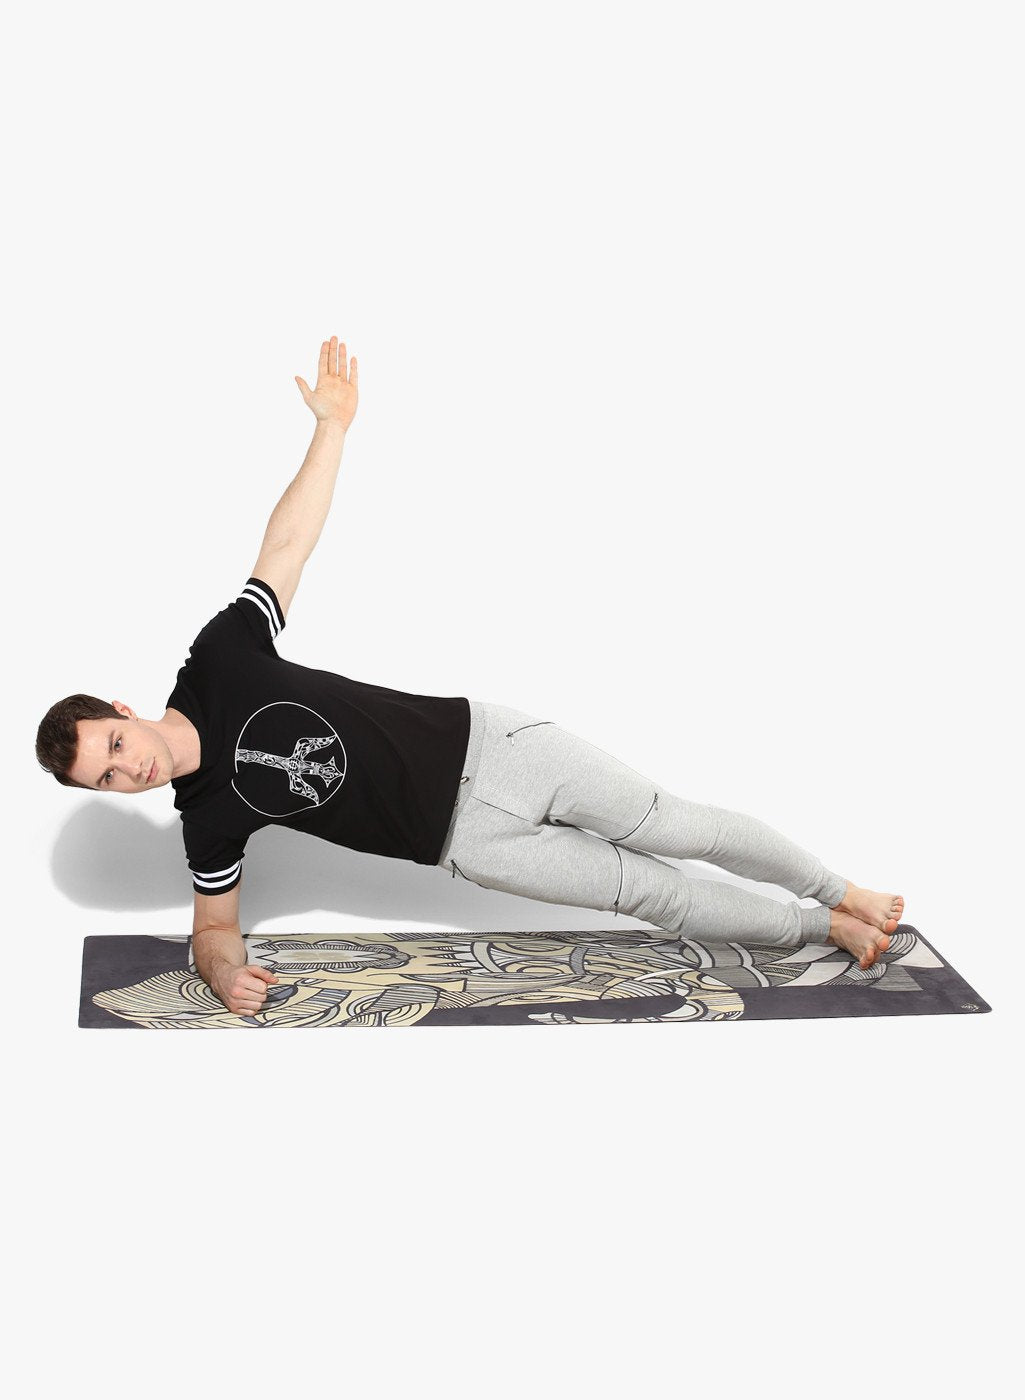 Indulge in luxury with our Elephant-Inspired Yoga Mat. Crafted from natural tree rubber and recycled plastic bottles, this mat combines opulence with eco-friendliness. Elevate your practice in style.